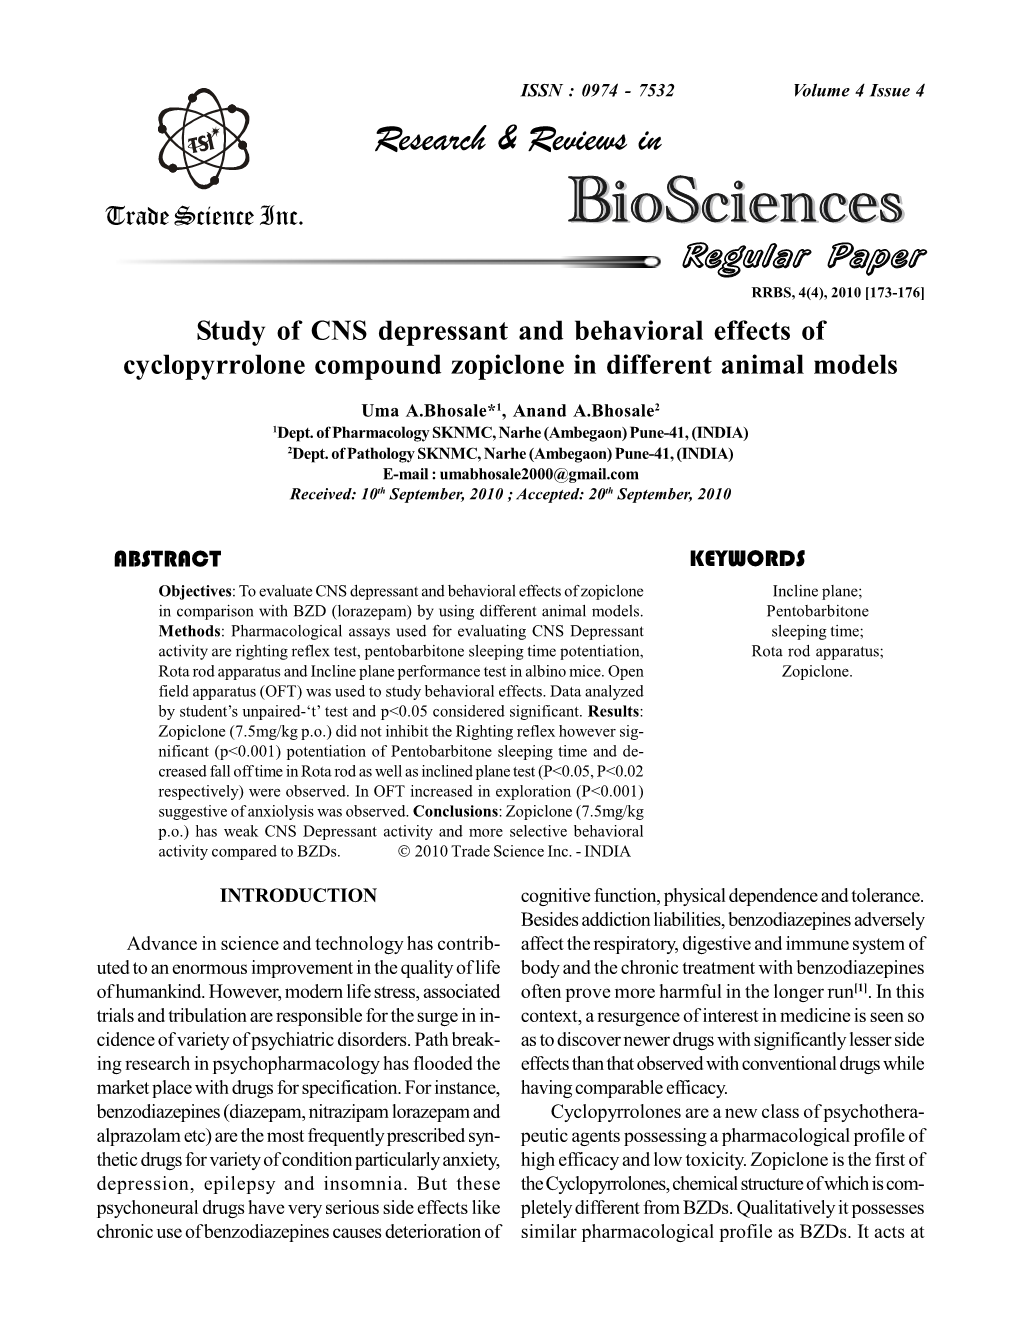 Study of CNS Depressant and Behavioral Effects of Cyclopyrrolone Compound Zopiclone in Different Animal Models